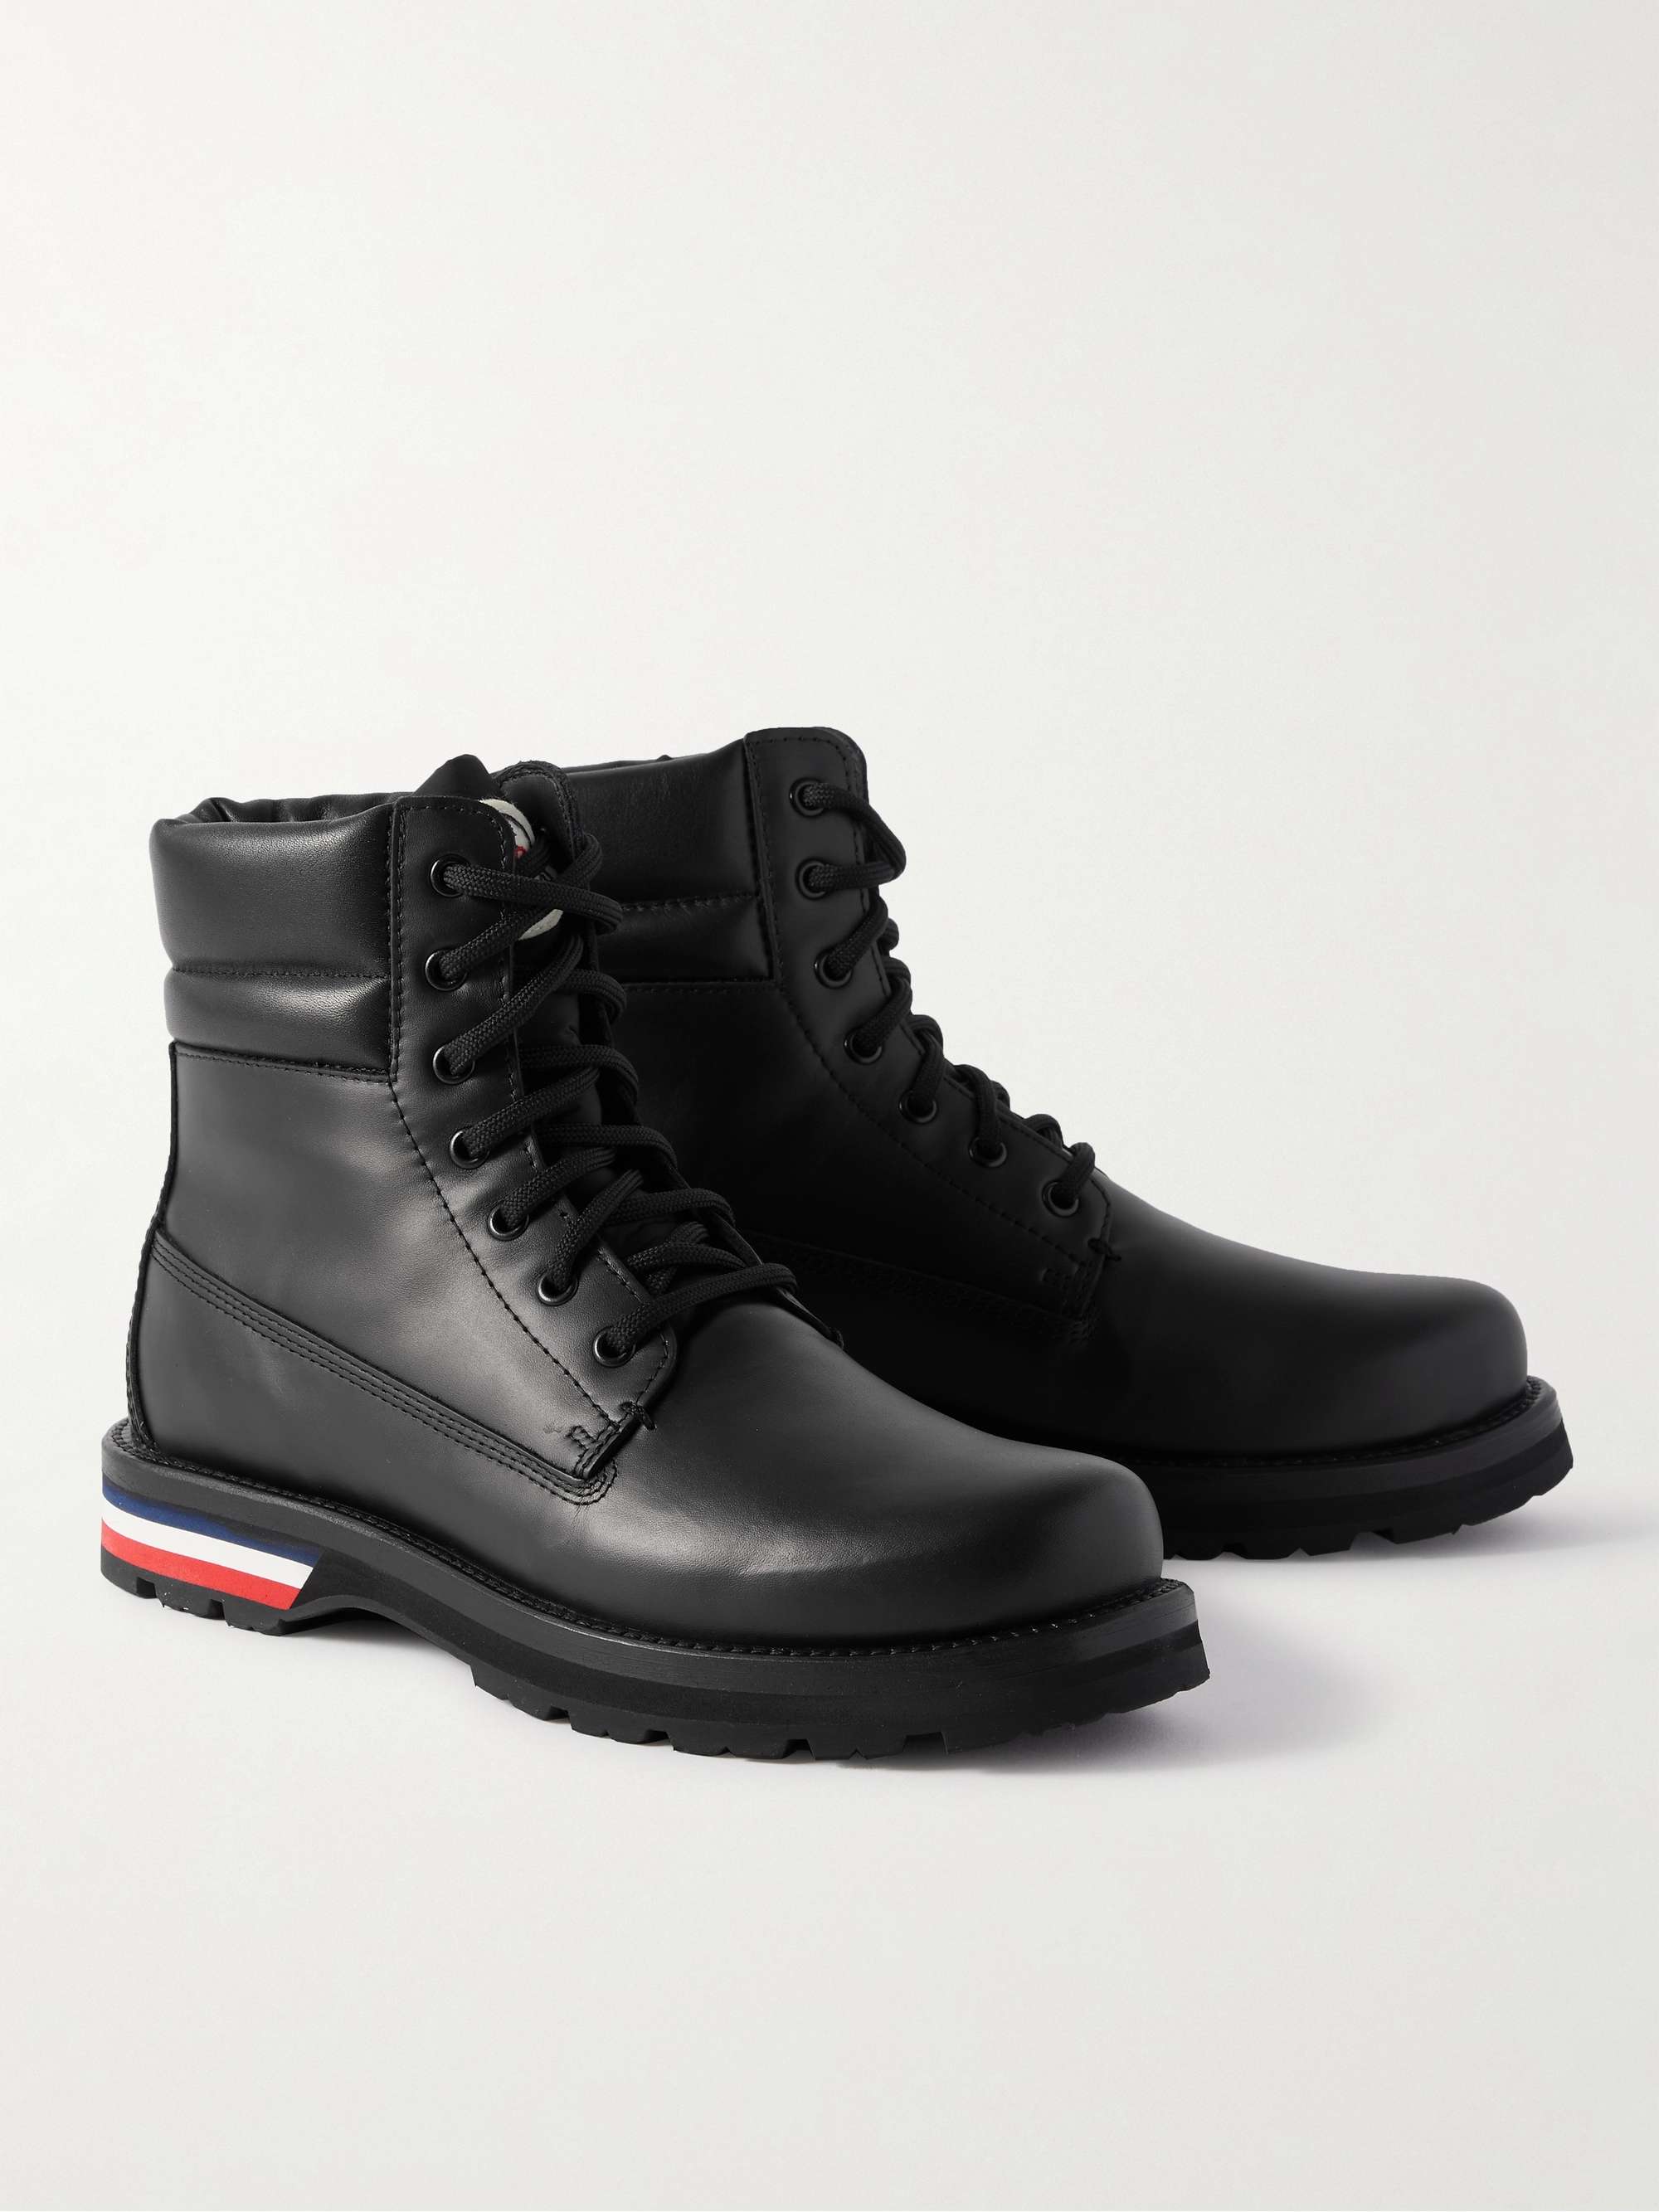 MONCLER Vancouver Striped Leather Hiking Boots